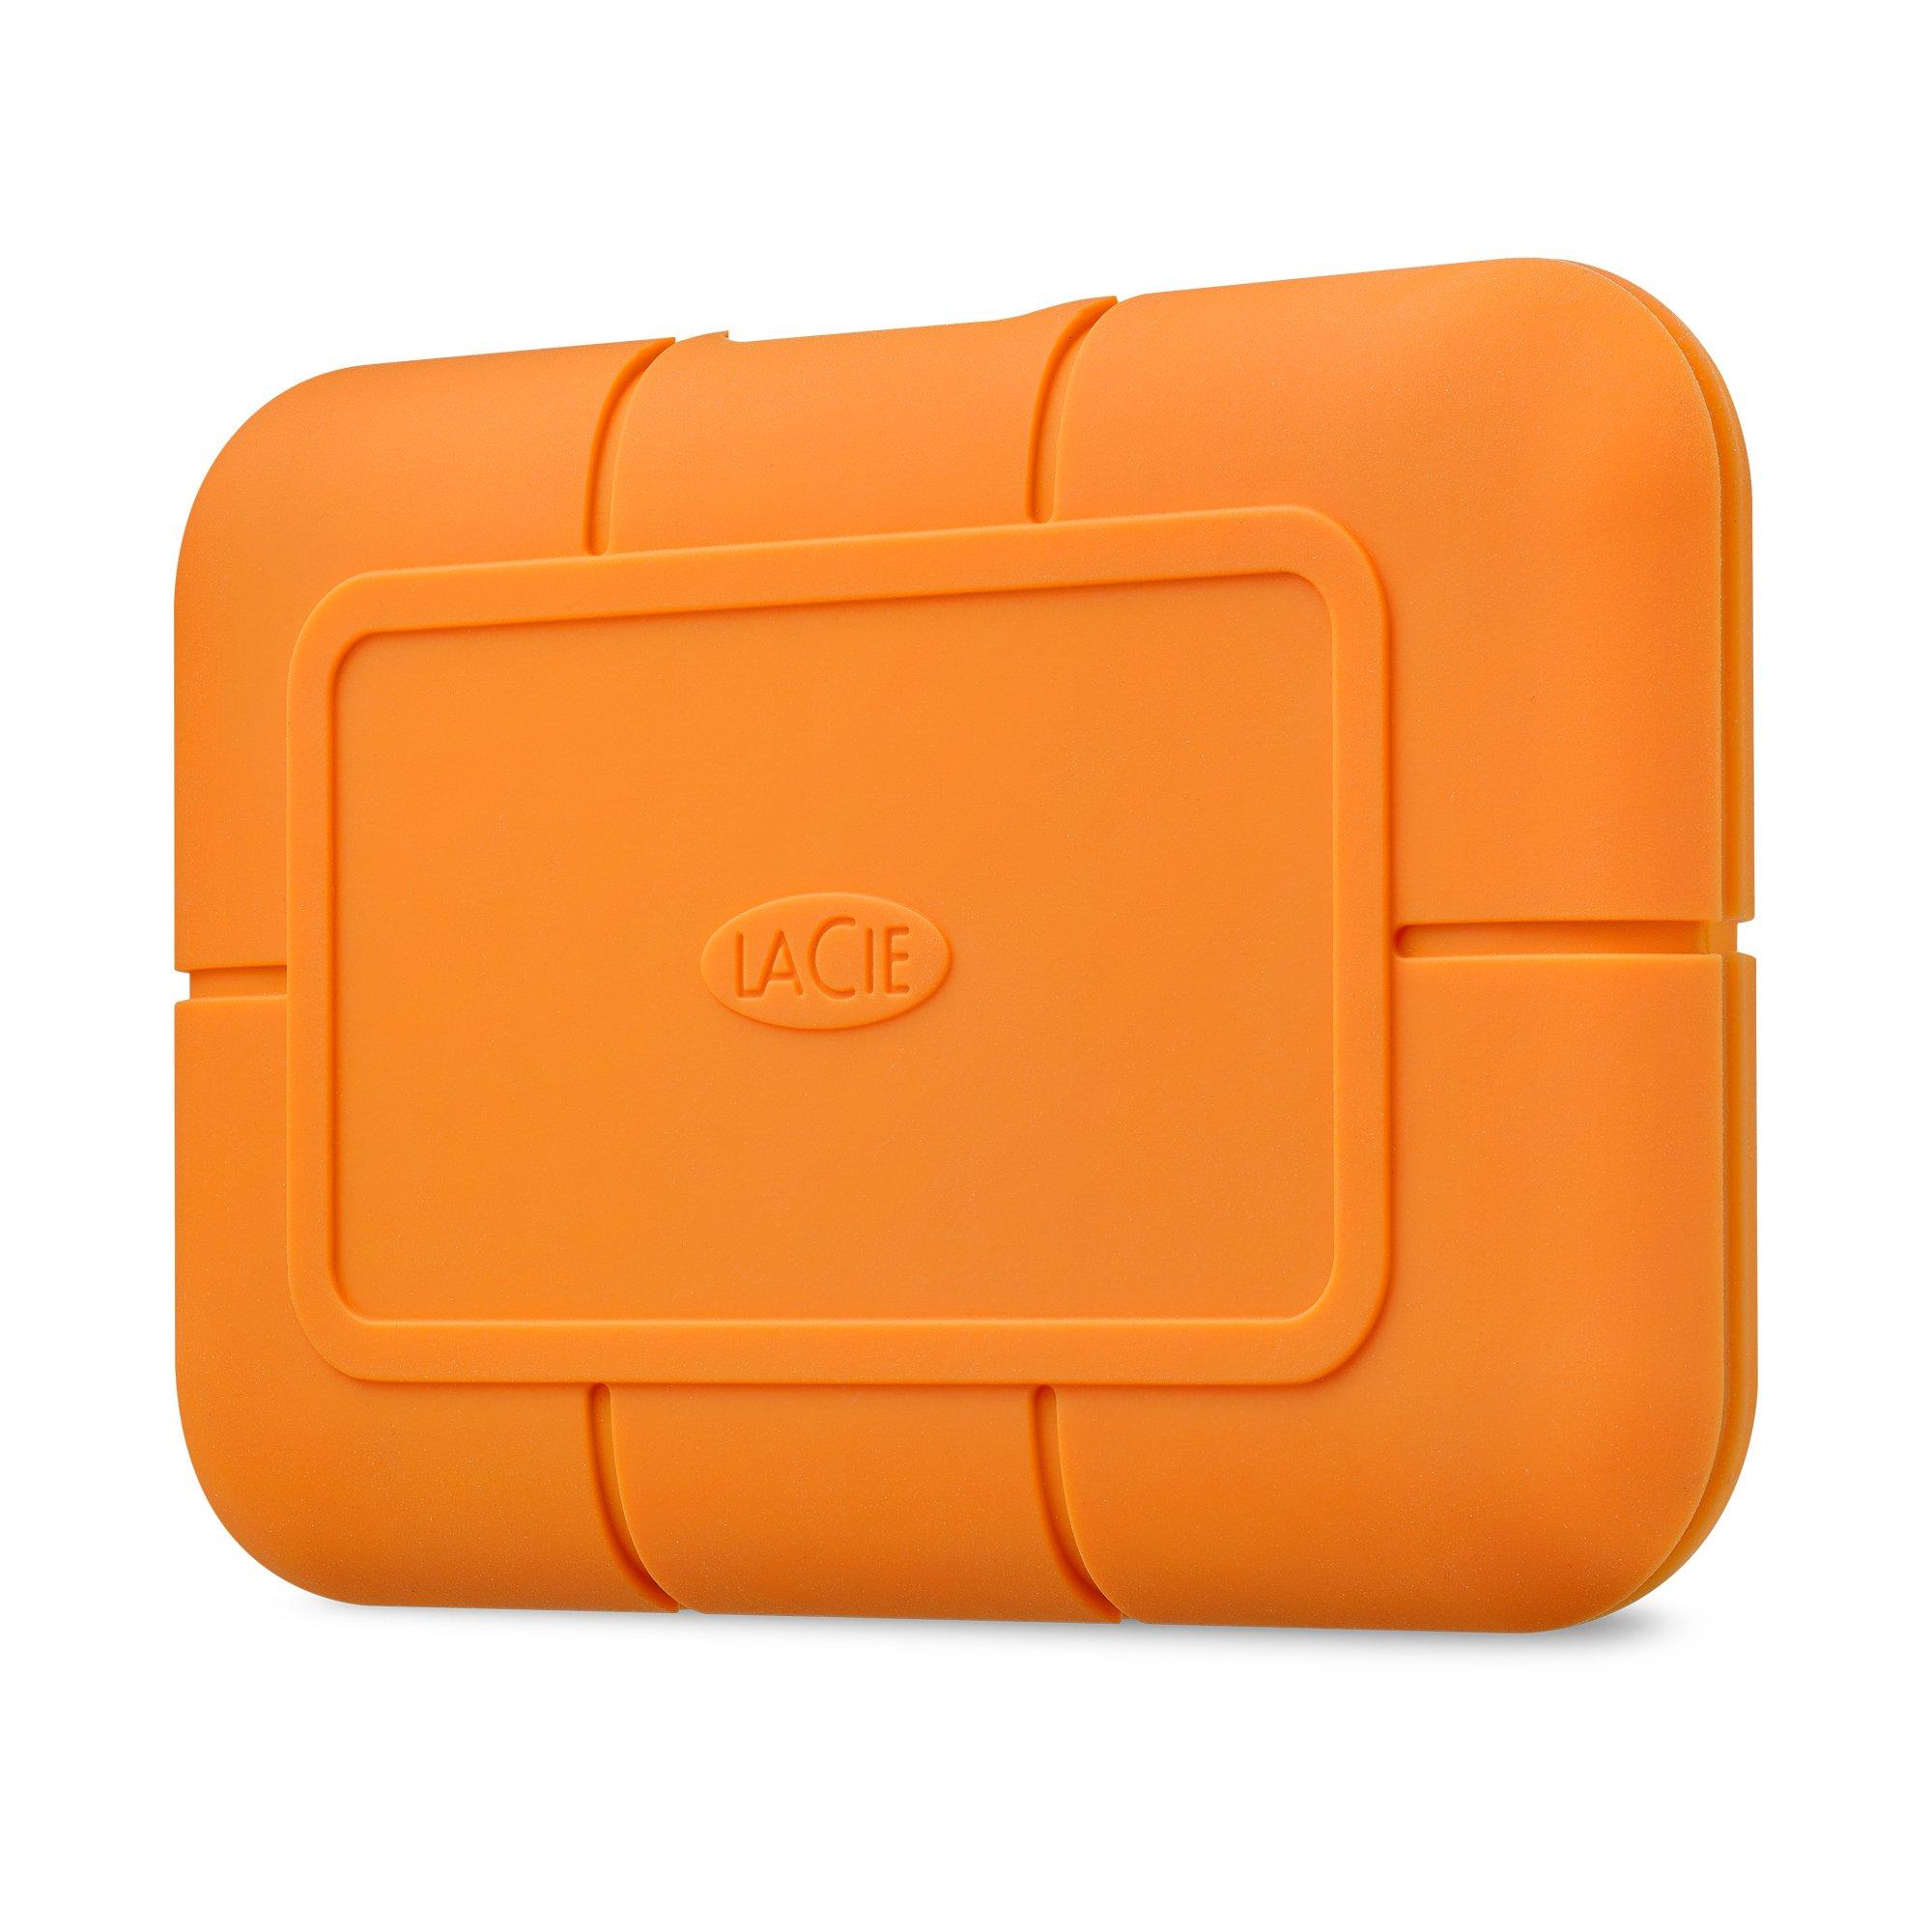 Image of LACIE Rugged SSD Portable SSD - 500 GB